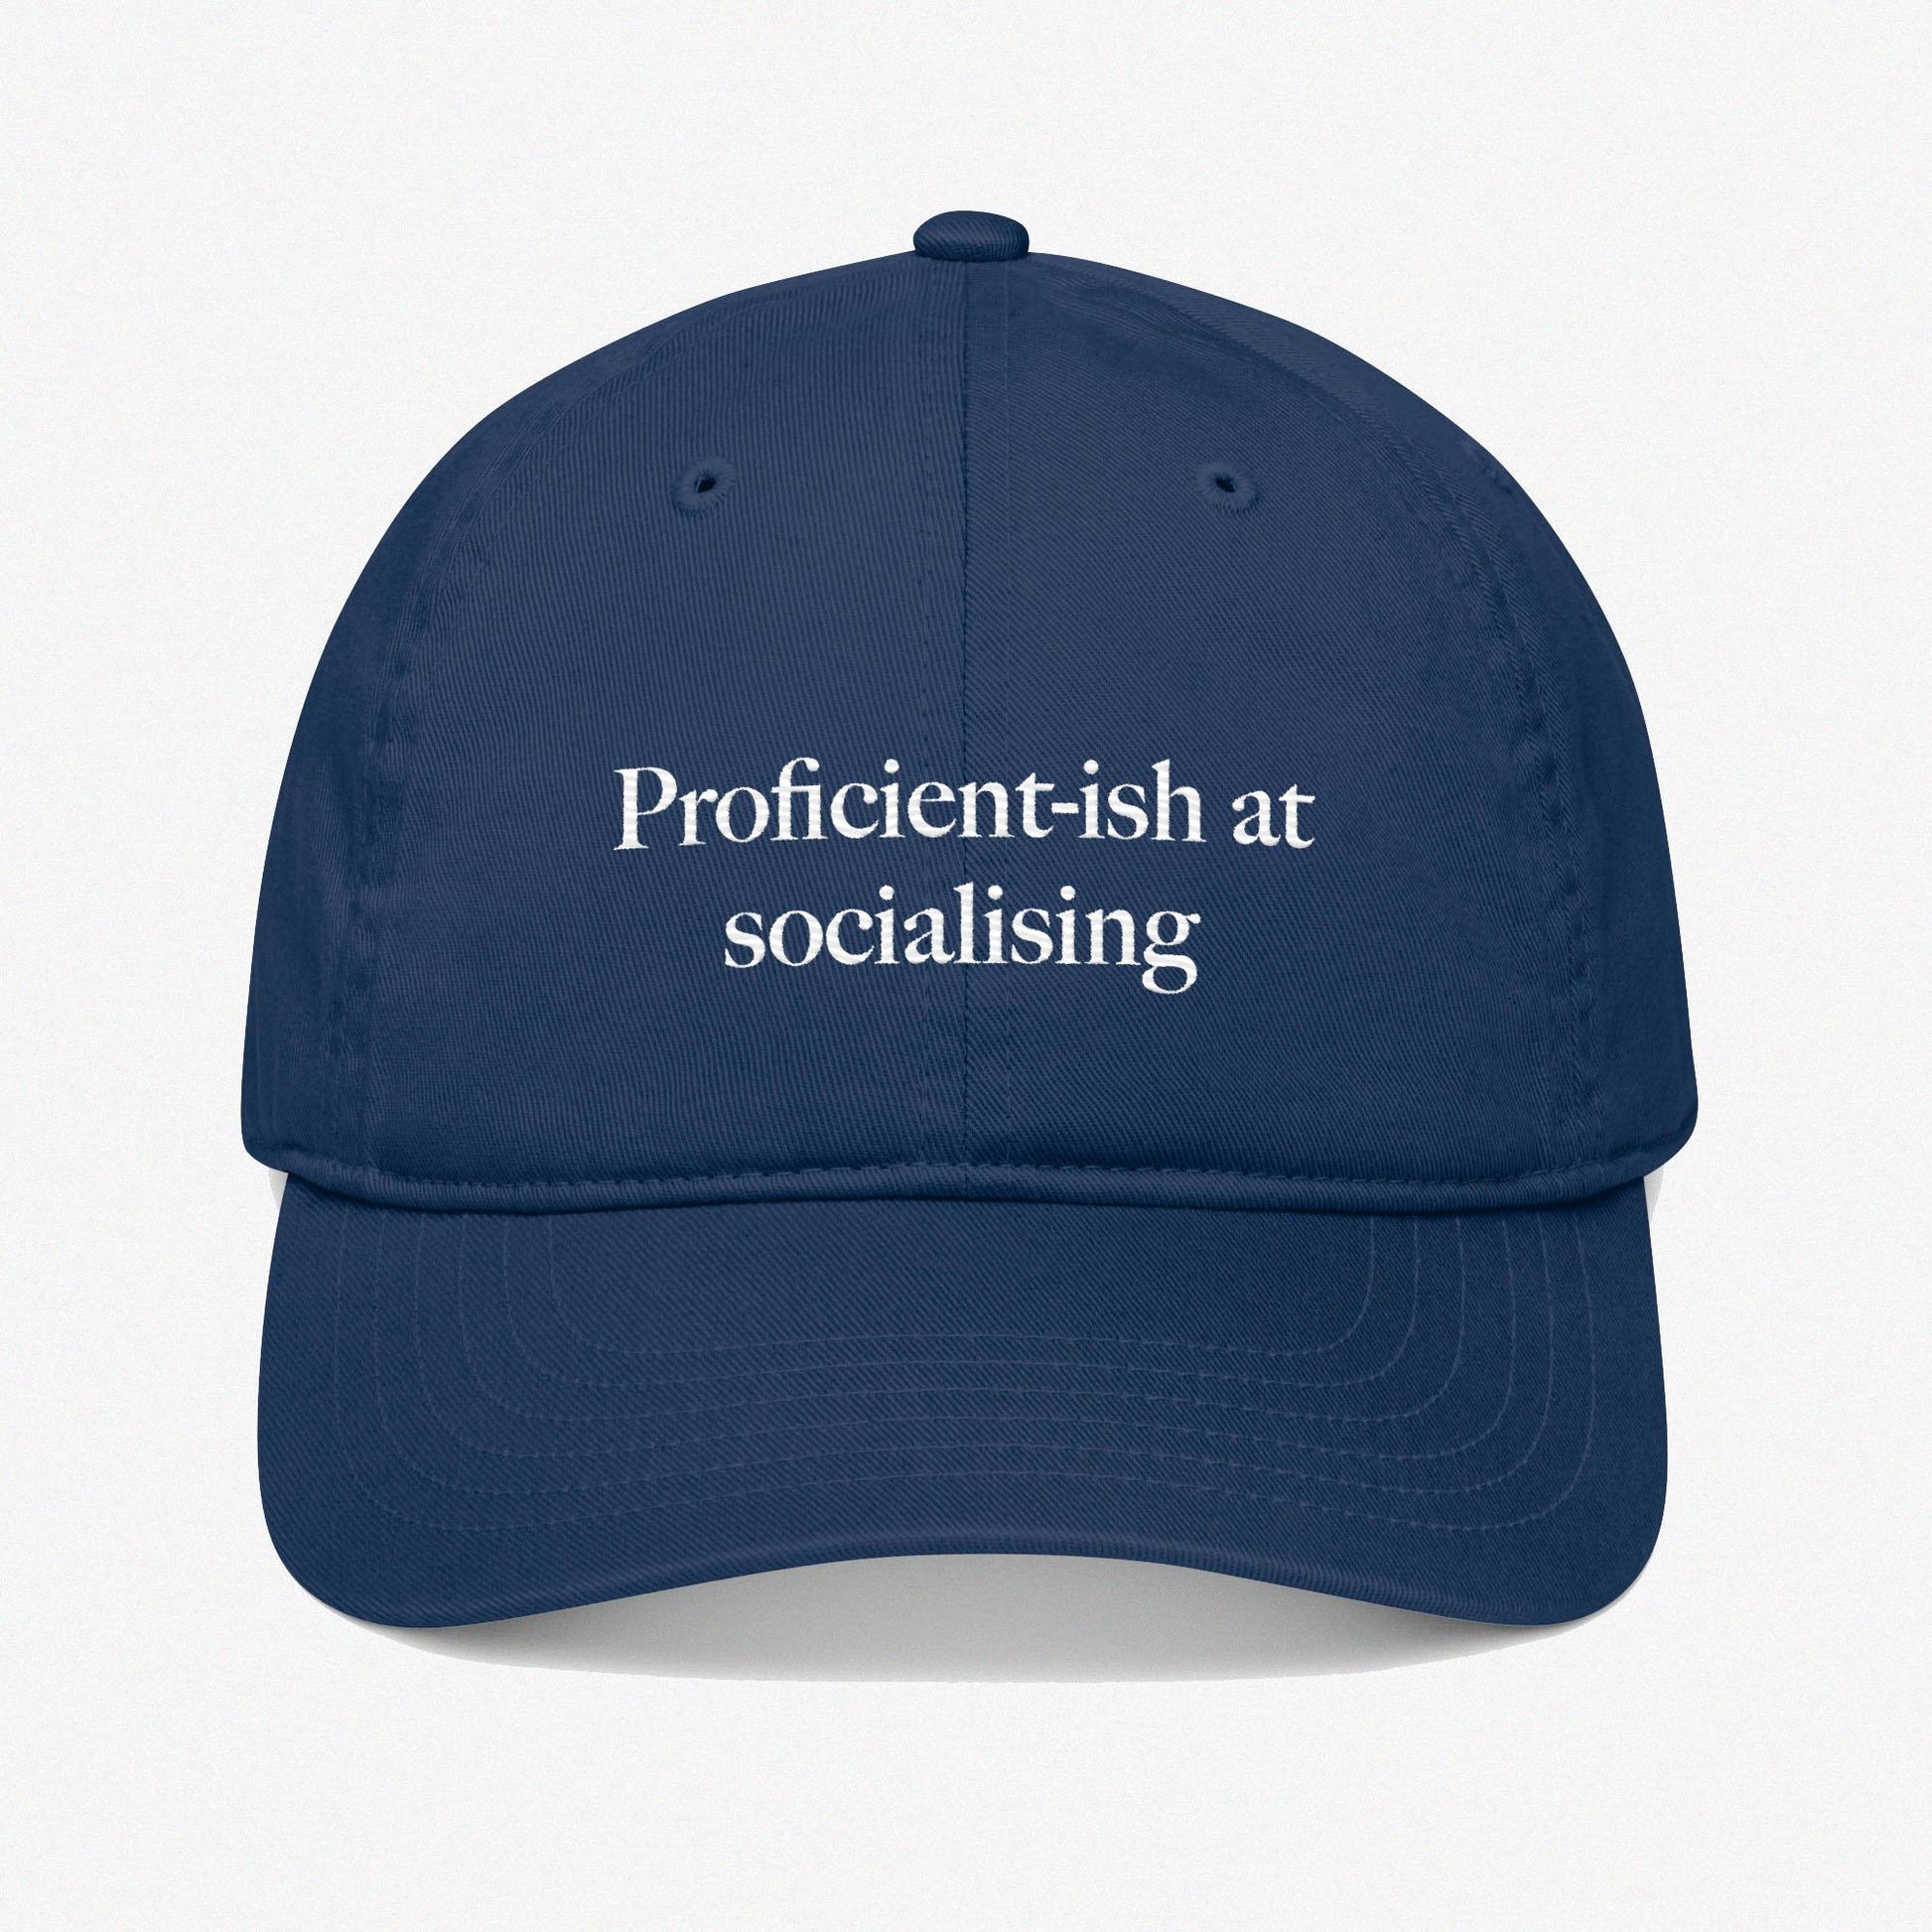 Dad hat, embroidered caption social skills, Low profiles, 6 panel hat, Organic cotton